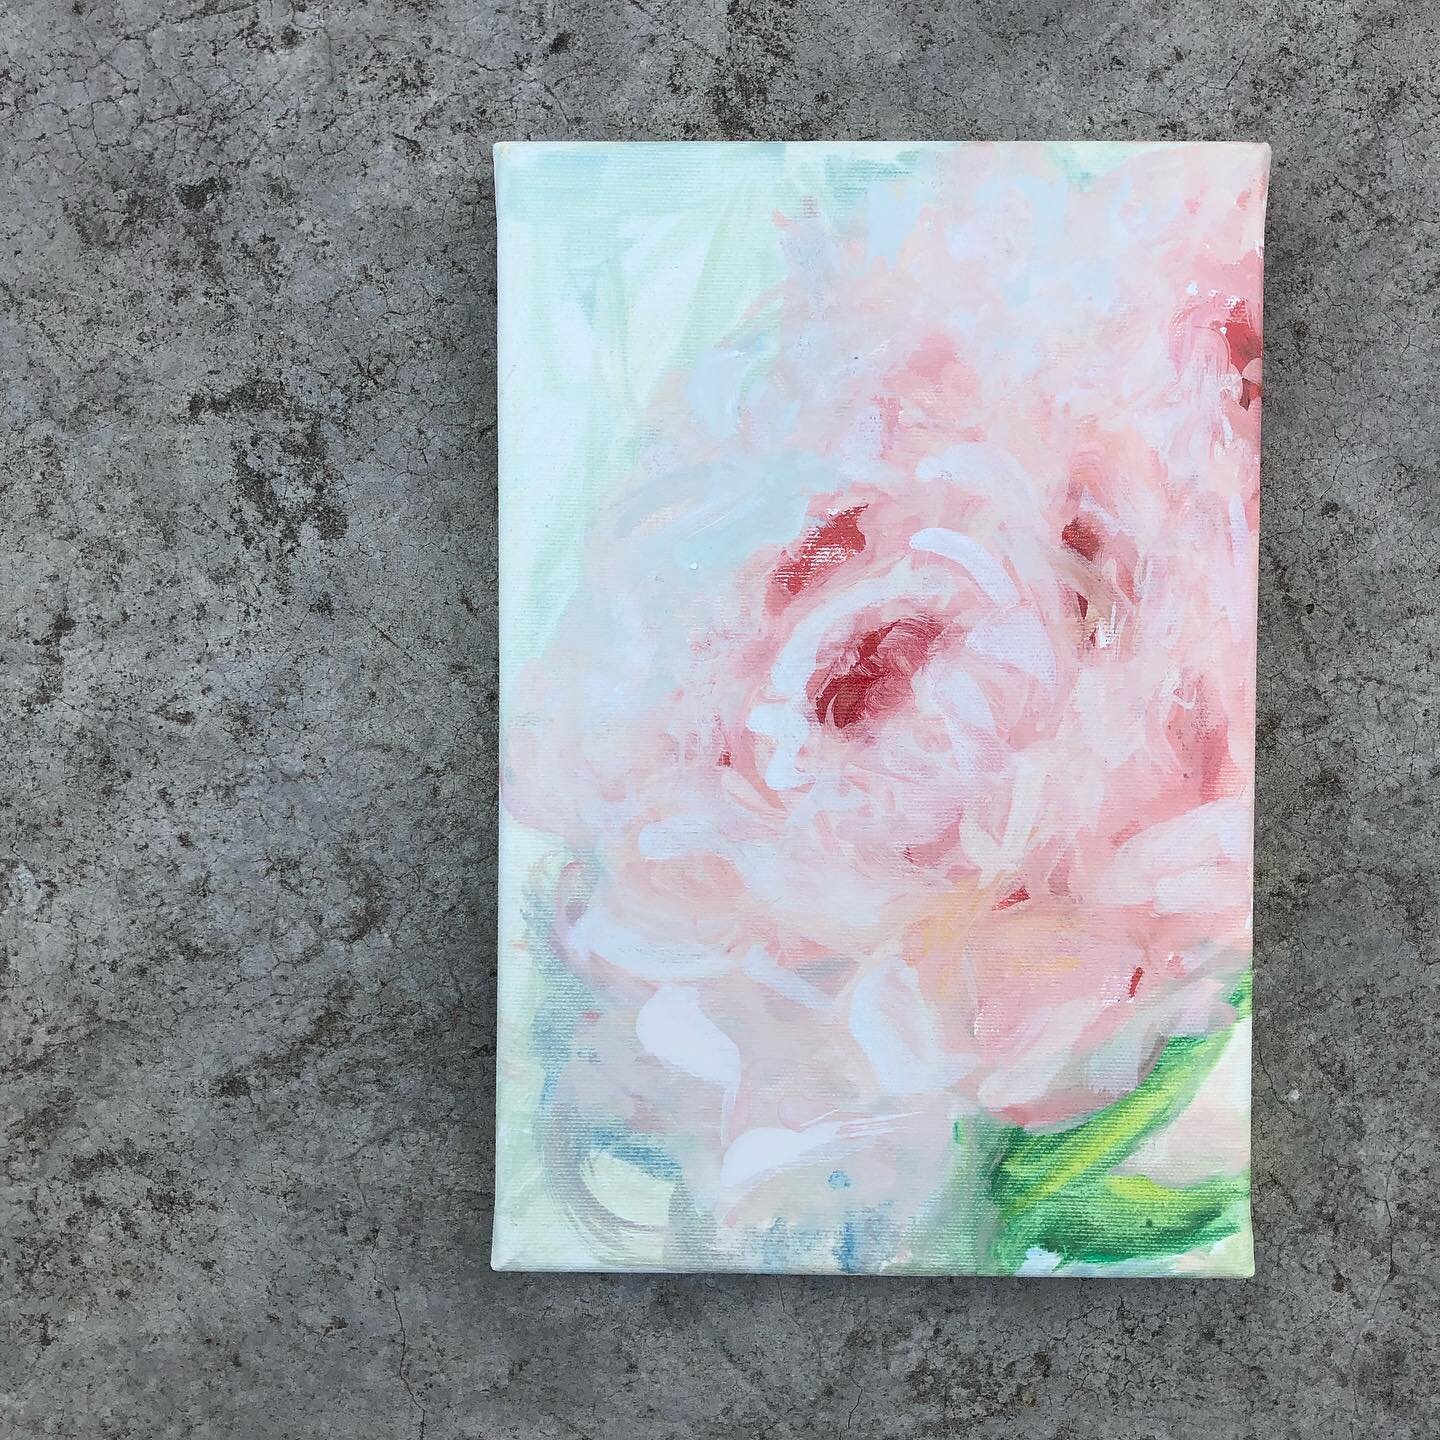 Adding a dash of pink into my green Insta profile&hellip;

The unbearable lightness of the peony / l&rsquo;Insoutenable l&eacute;g&egrave;ret&eacute; de la pivoine
30x20 cm, oil on canvas

This work is available for sale as part of the #artistsupport